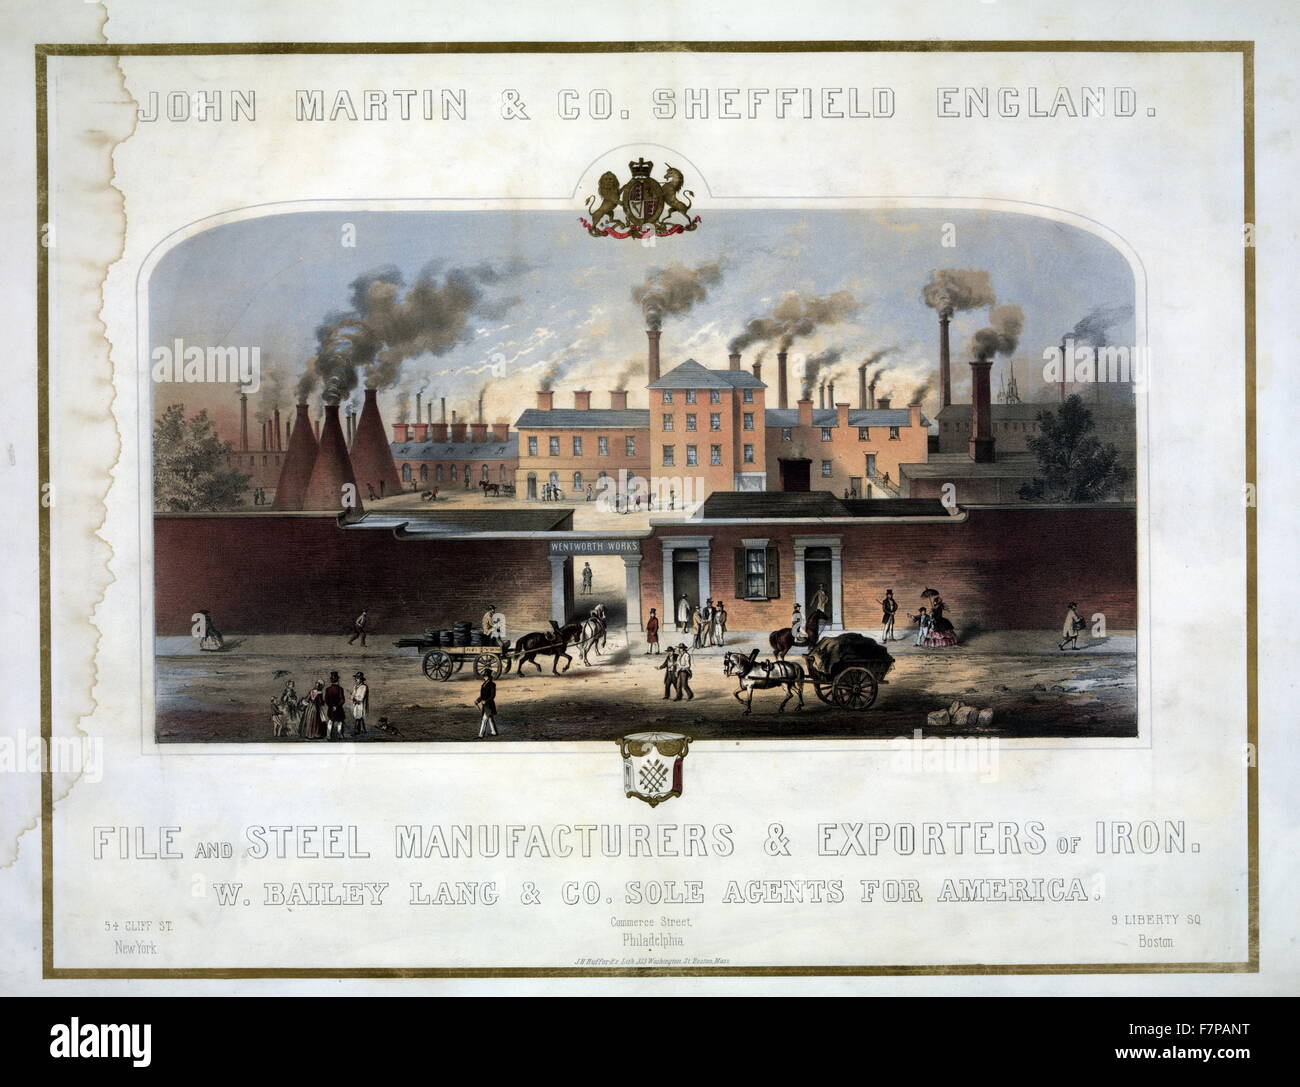 John Martin & Co., Sheffield, England. File and Steel manufacturers and exporters of iron. W. Bailey Lang & Co. sole agents for America, J.H. Bufford's Lith., Boston, Mass. Colour lithograph print of Wentworth Works, with busy street scene in foreground. Stock Photo